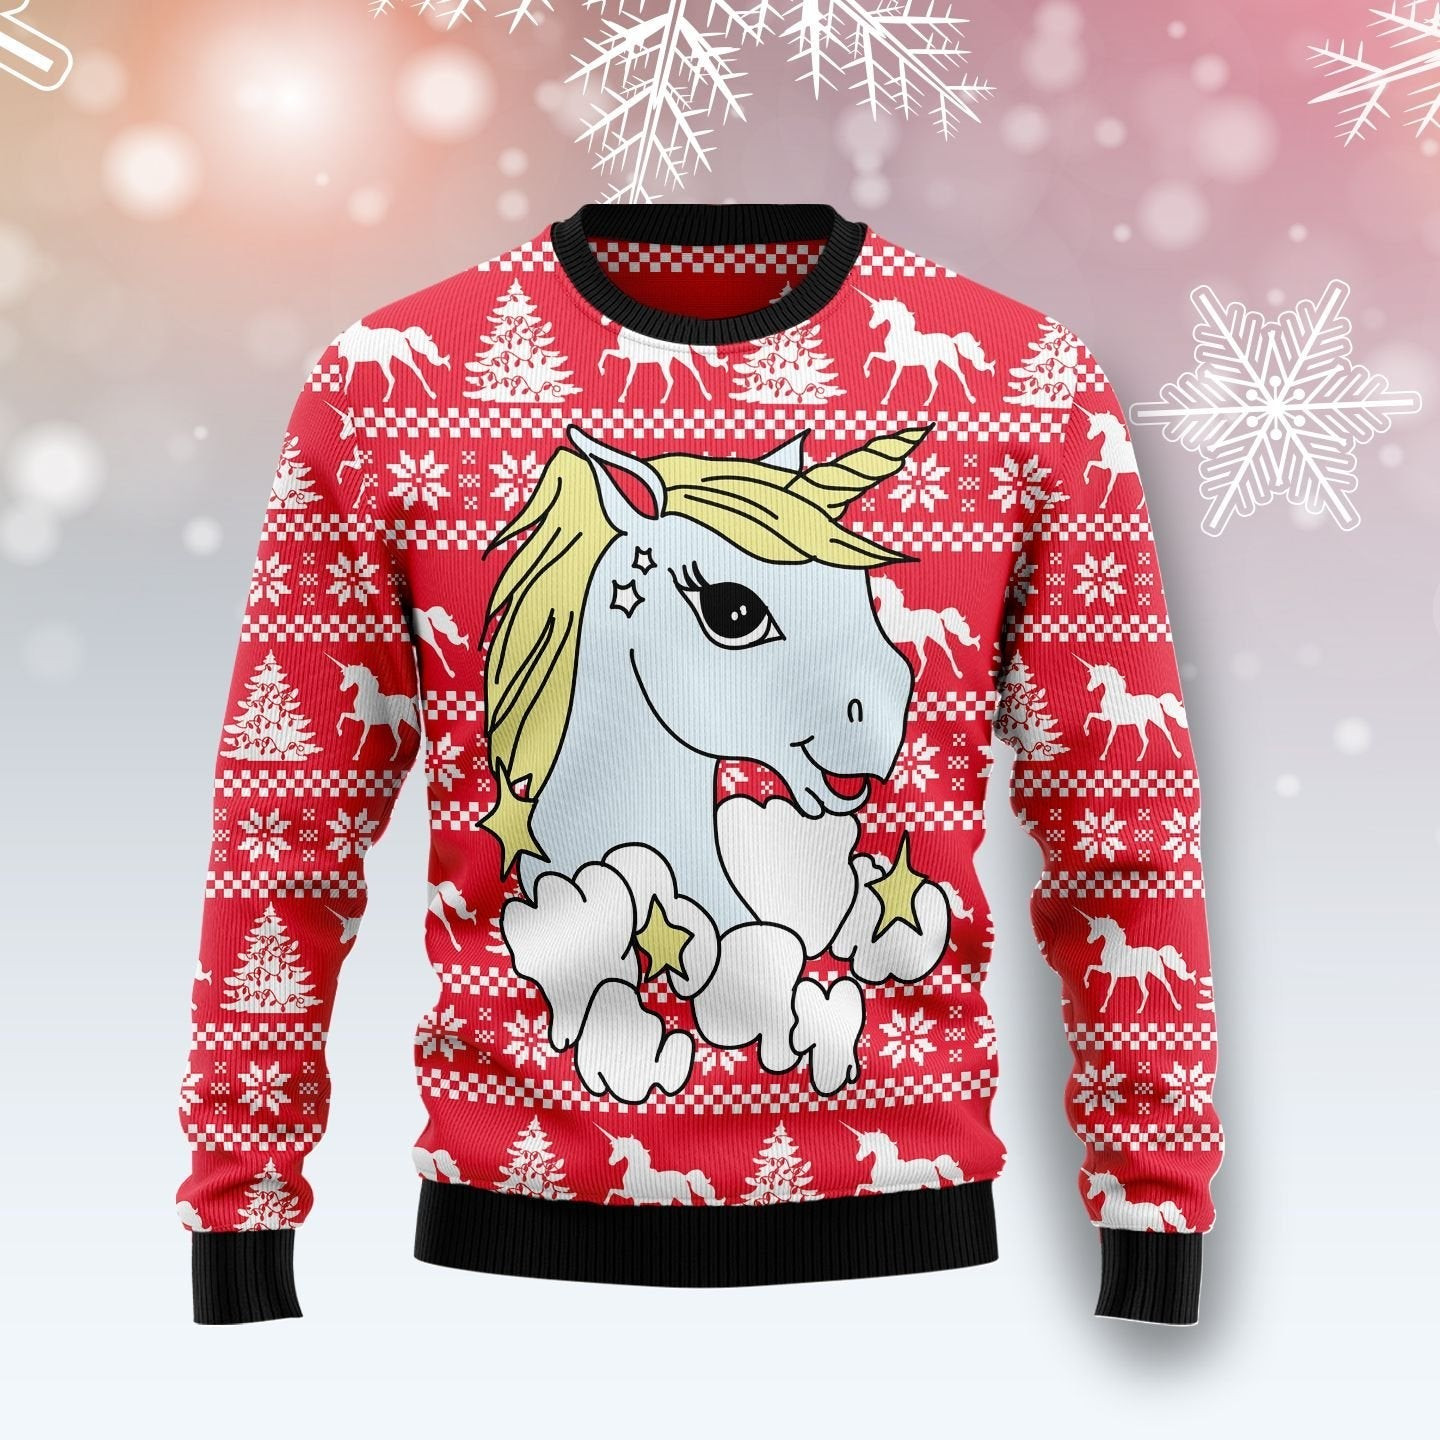 Lovely Unicorn Ugly Christmas Sweater Ugly Sweater For Men Women, Holiday Sweater